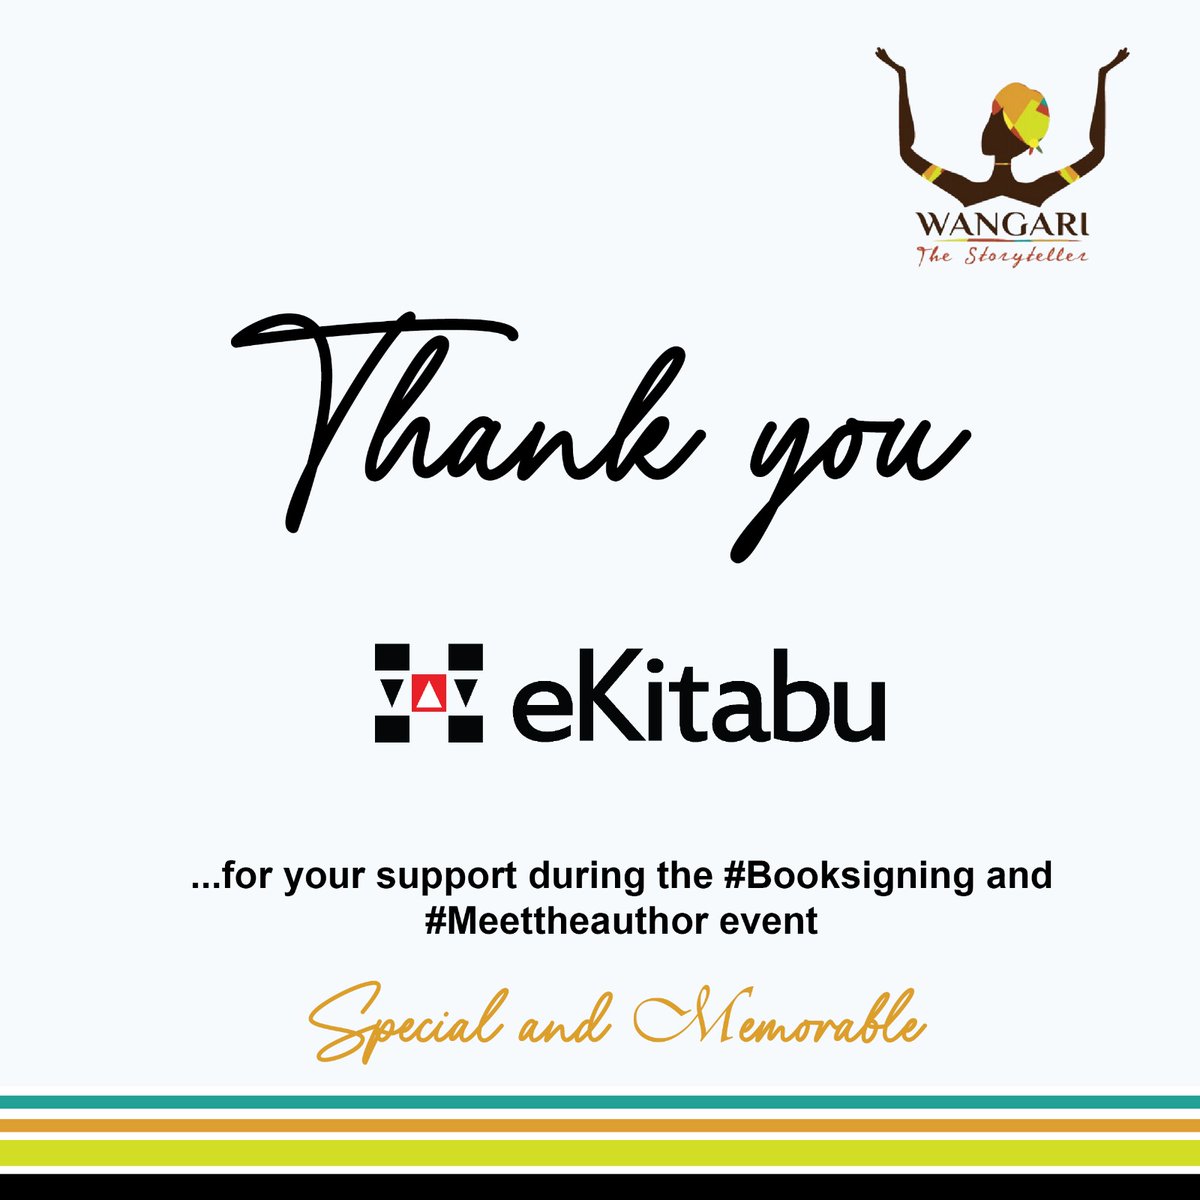 I would definitely not have hacked the #MeetTheAuthor event without the support of @ekitabu . Not only were they part of the program, they took care of all the logistics around getting books from different publishers and ensuring that all my titles were available for the day.